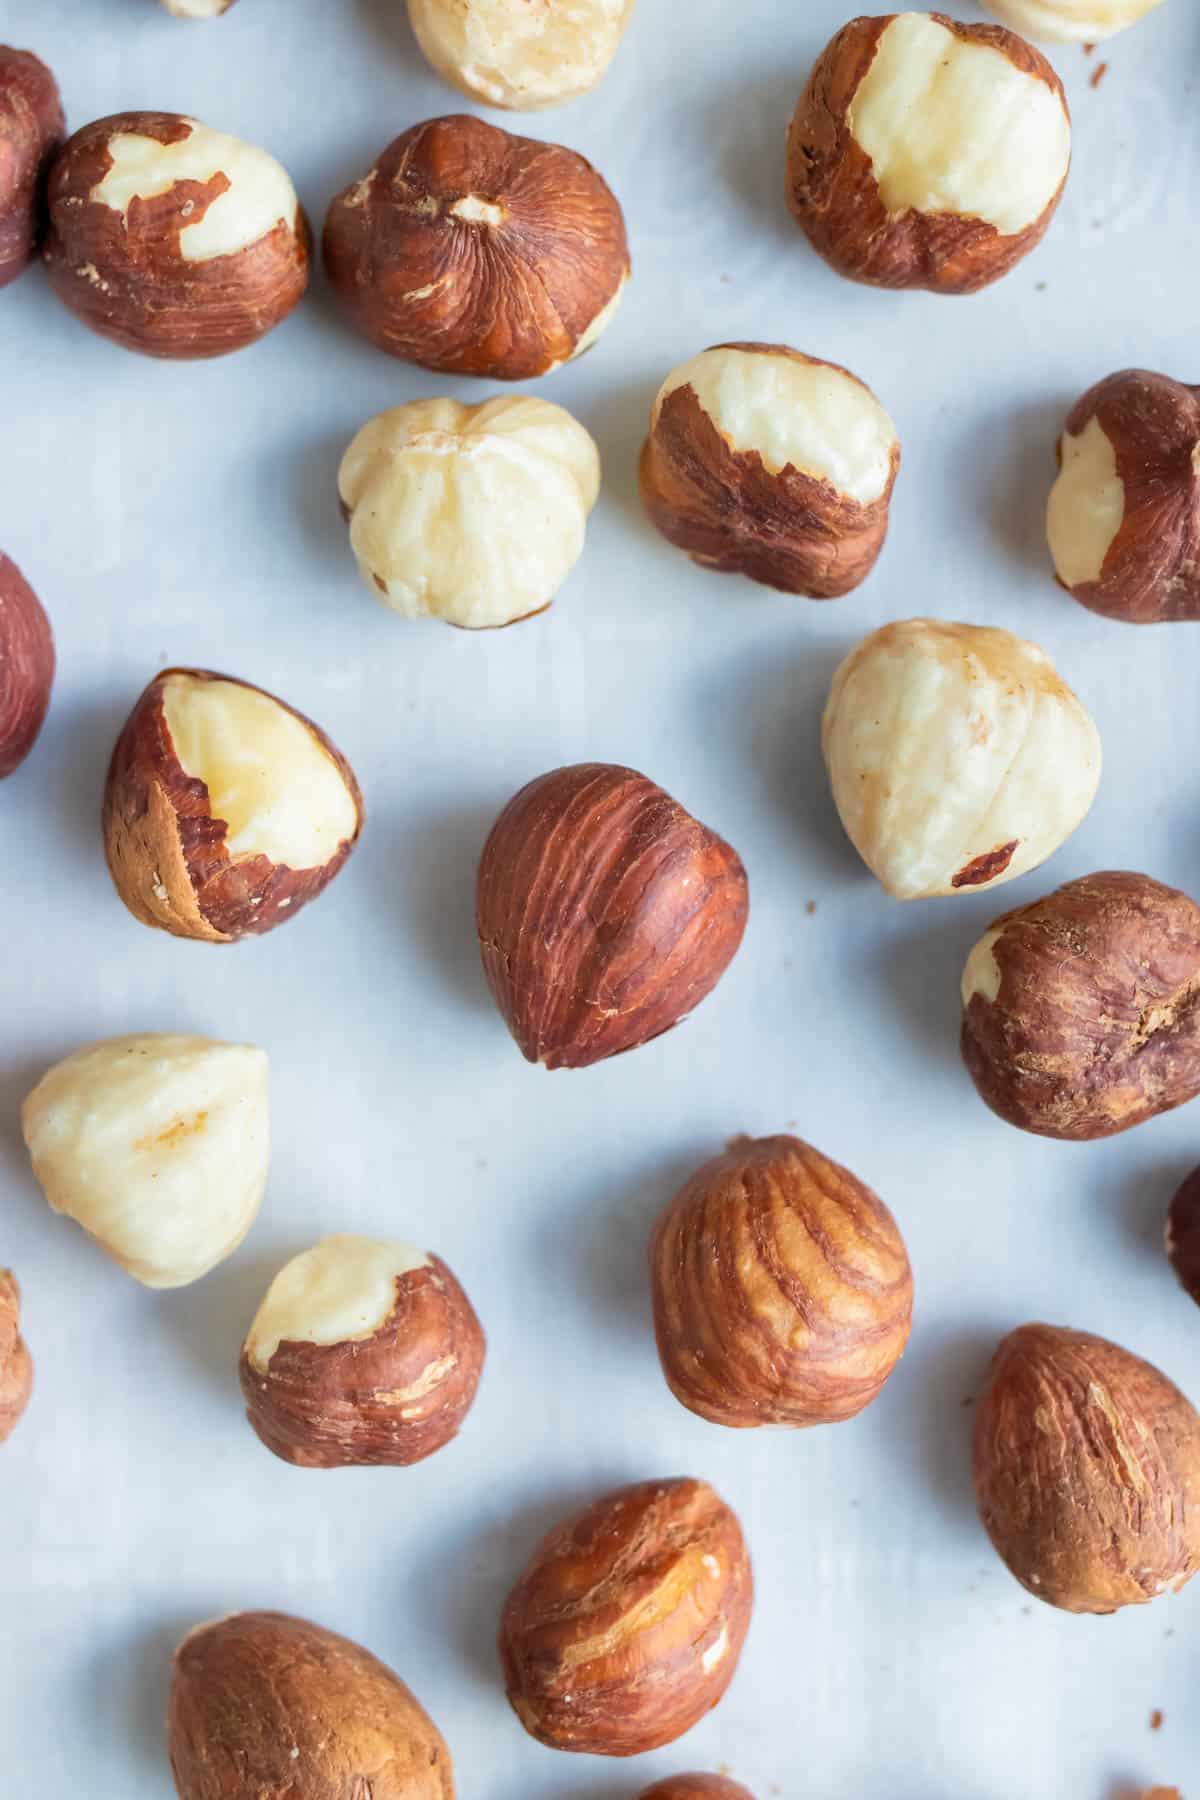 Learn how to toast hazelnuts in the oven or on the stove.